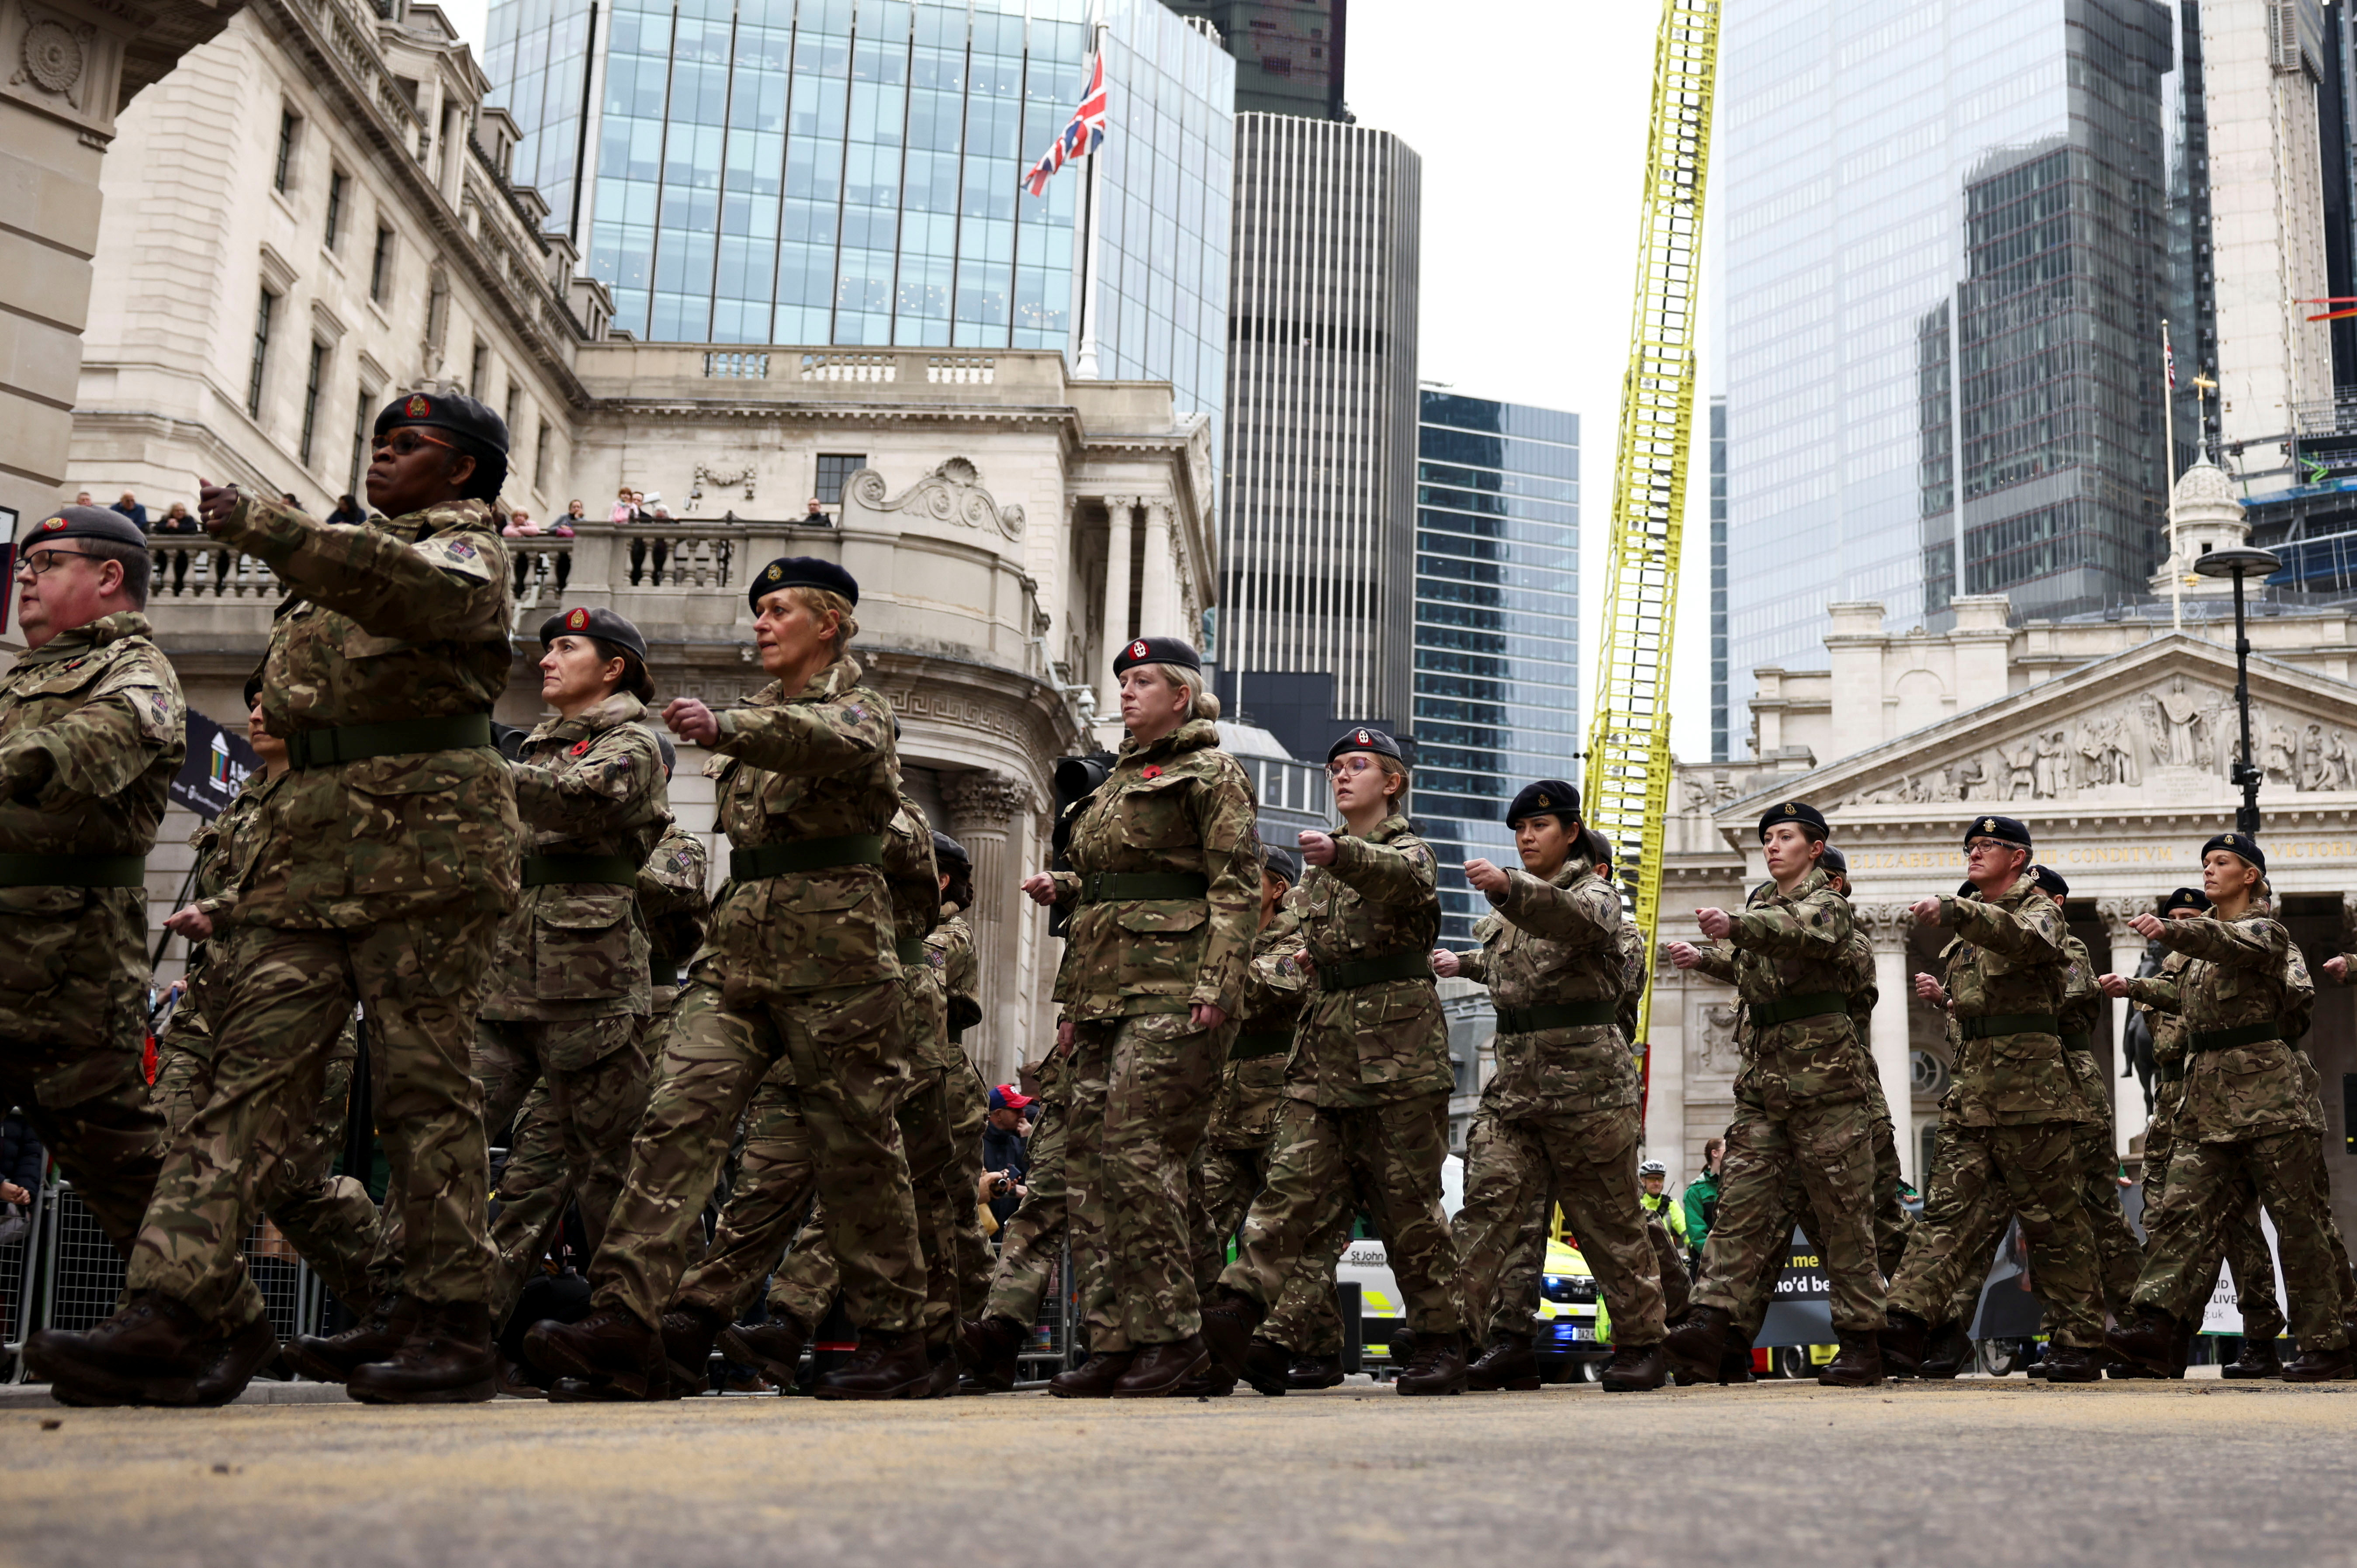 British Army Regains Control Twitter and YouTube Accounts Restored After Hack